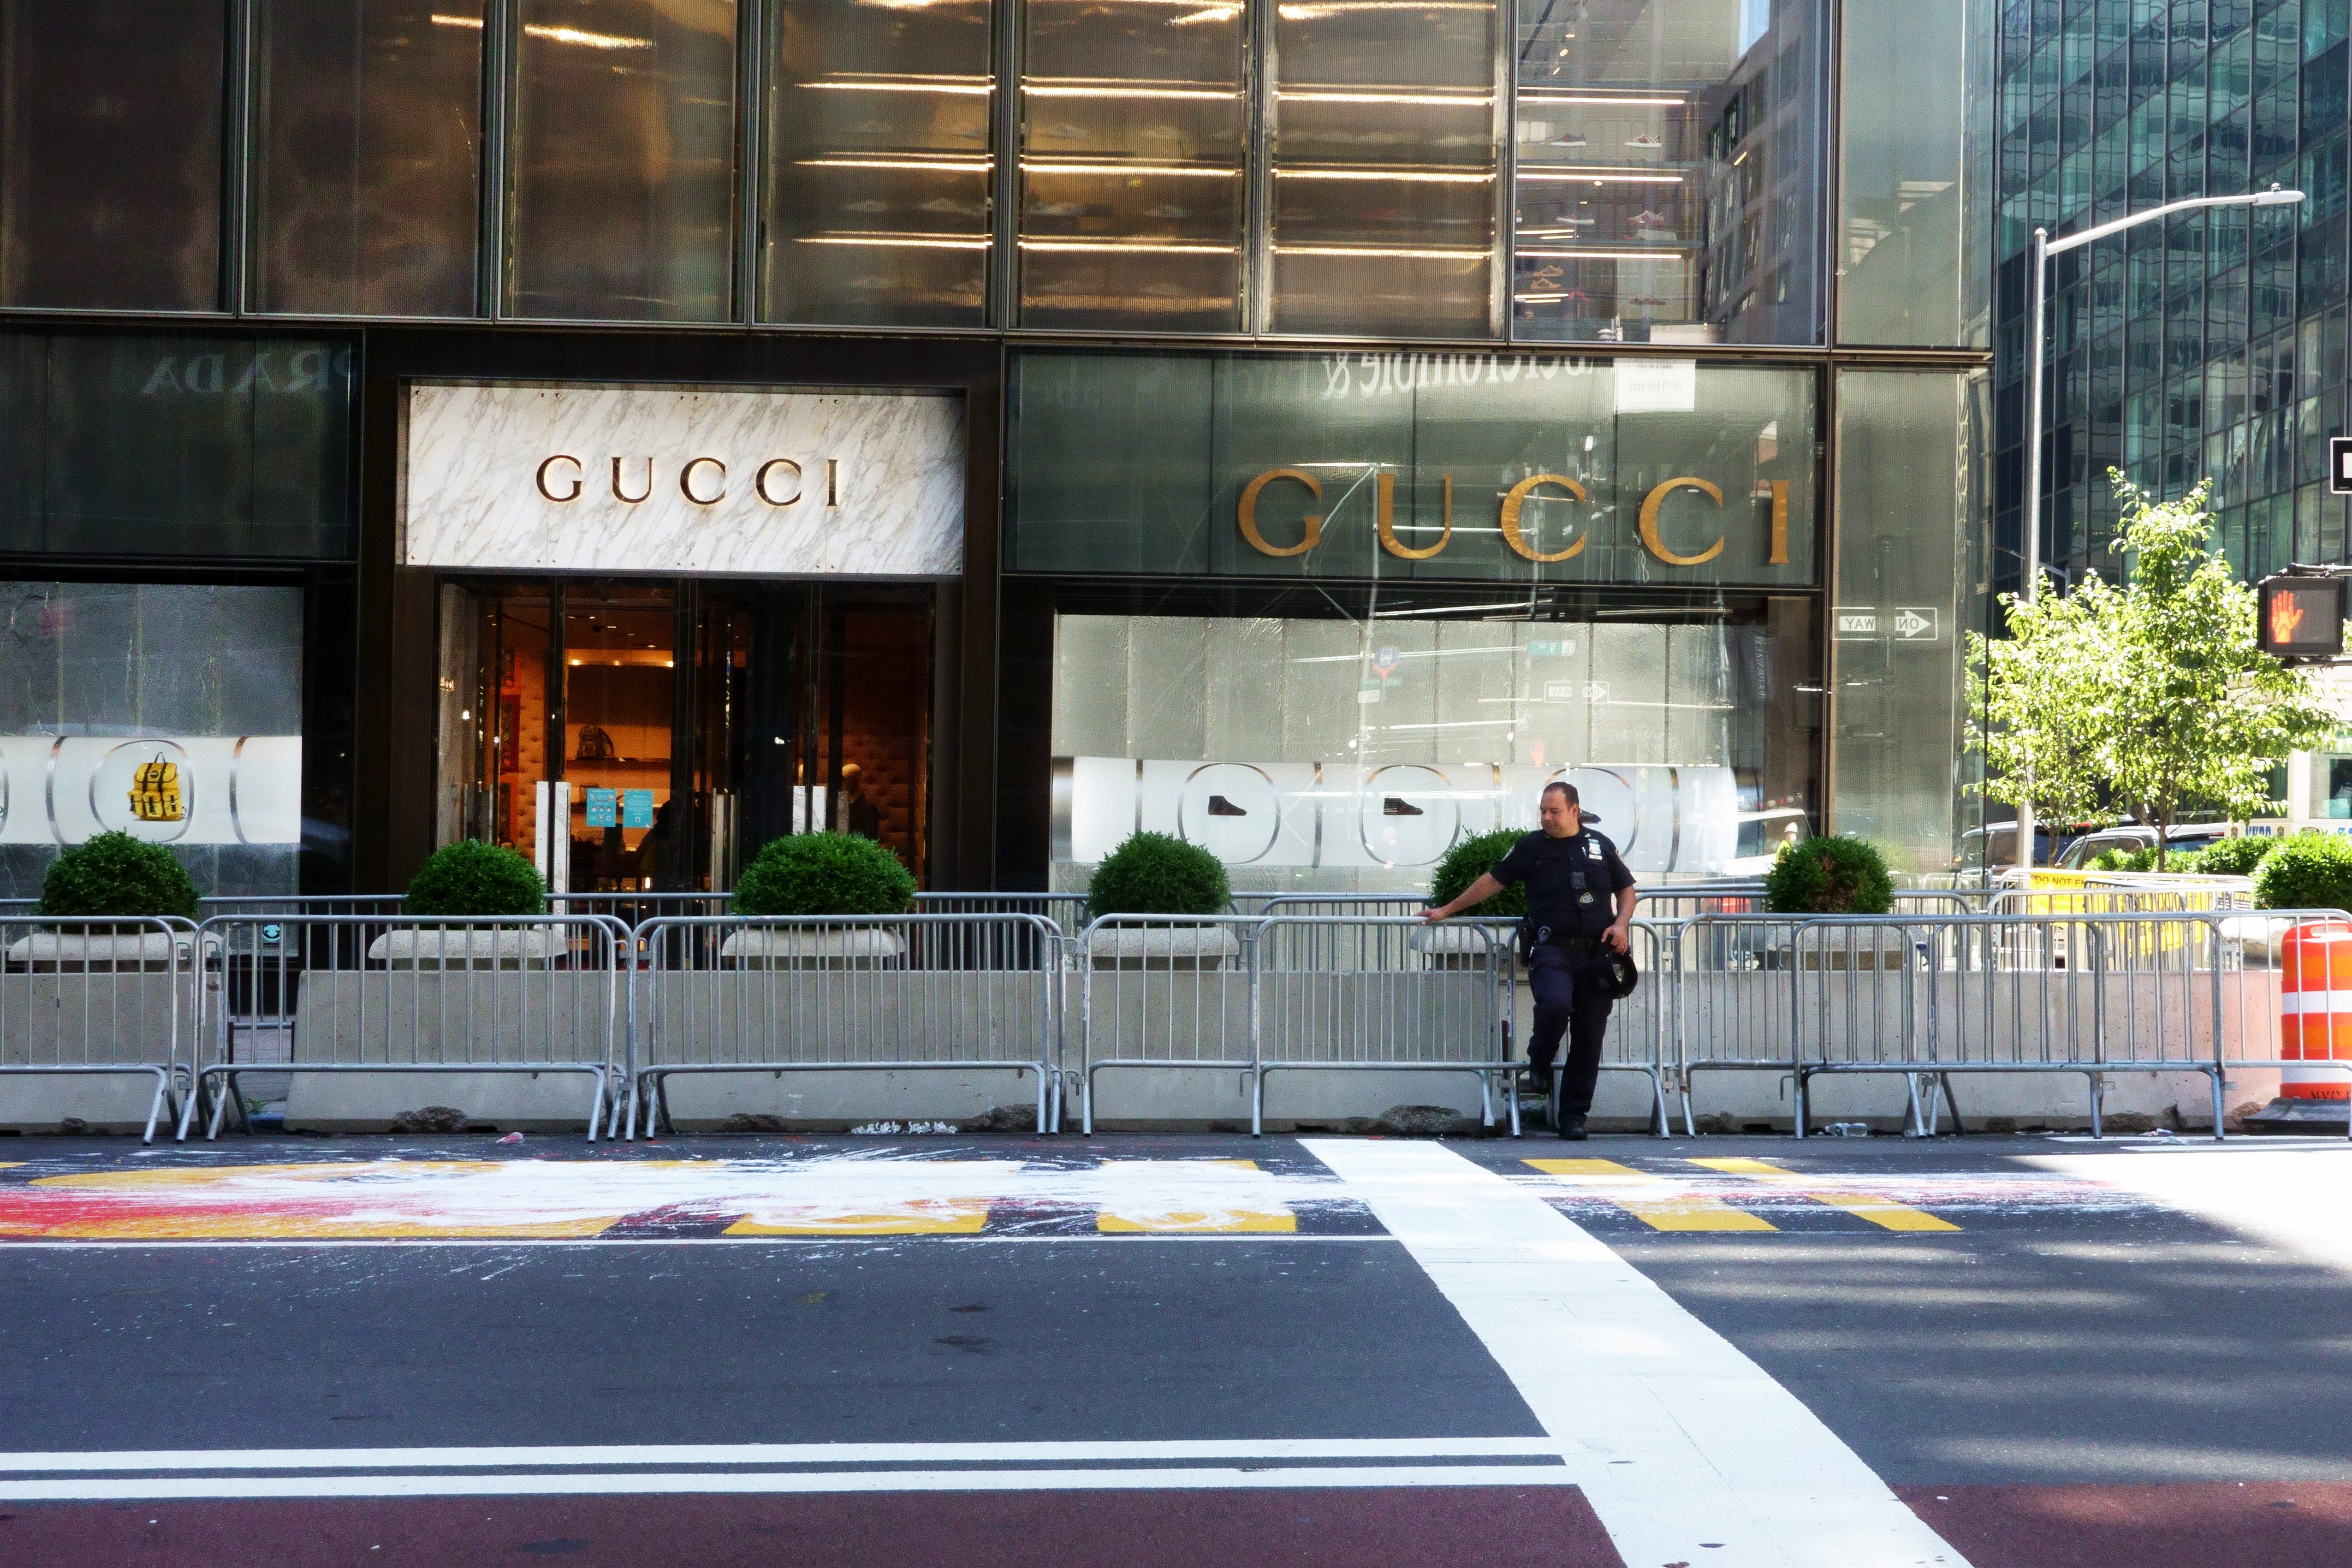 Gucci flagship store 5th Avenue, New York